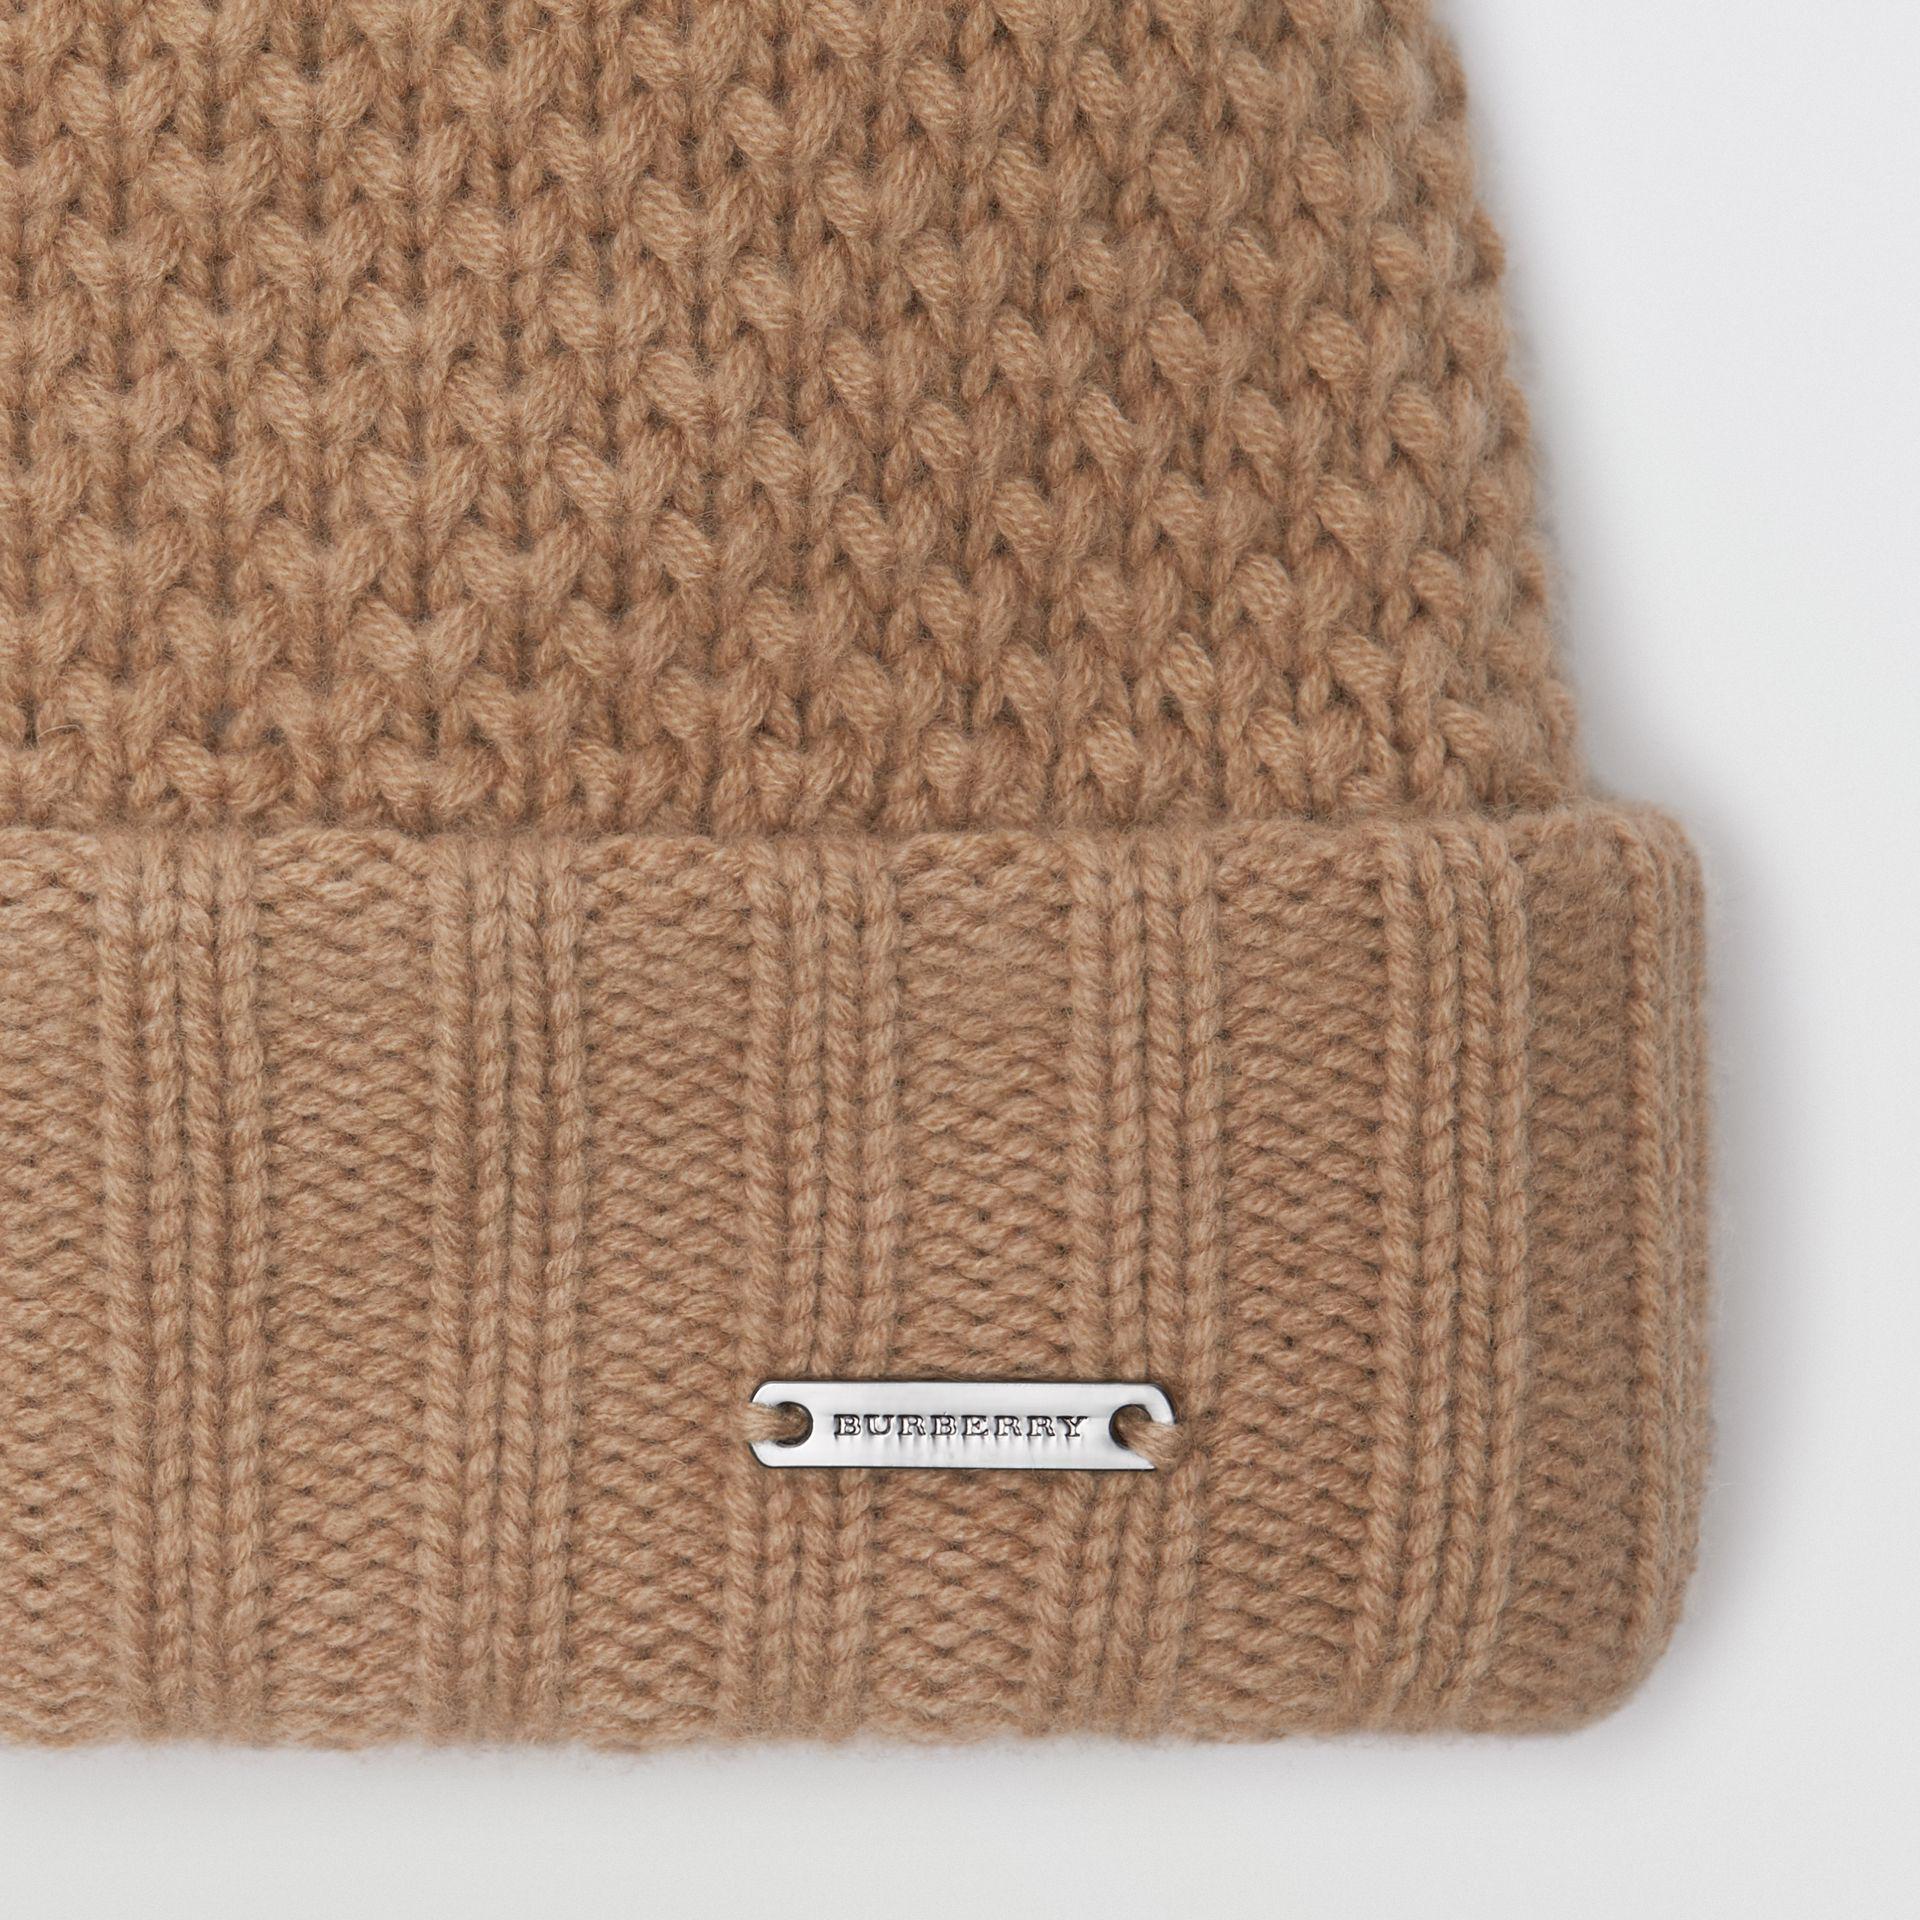 Burberry Fur Pom-pom Wool Cashmere Beanie in Natural | Lyst